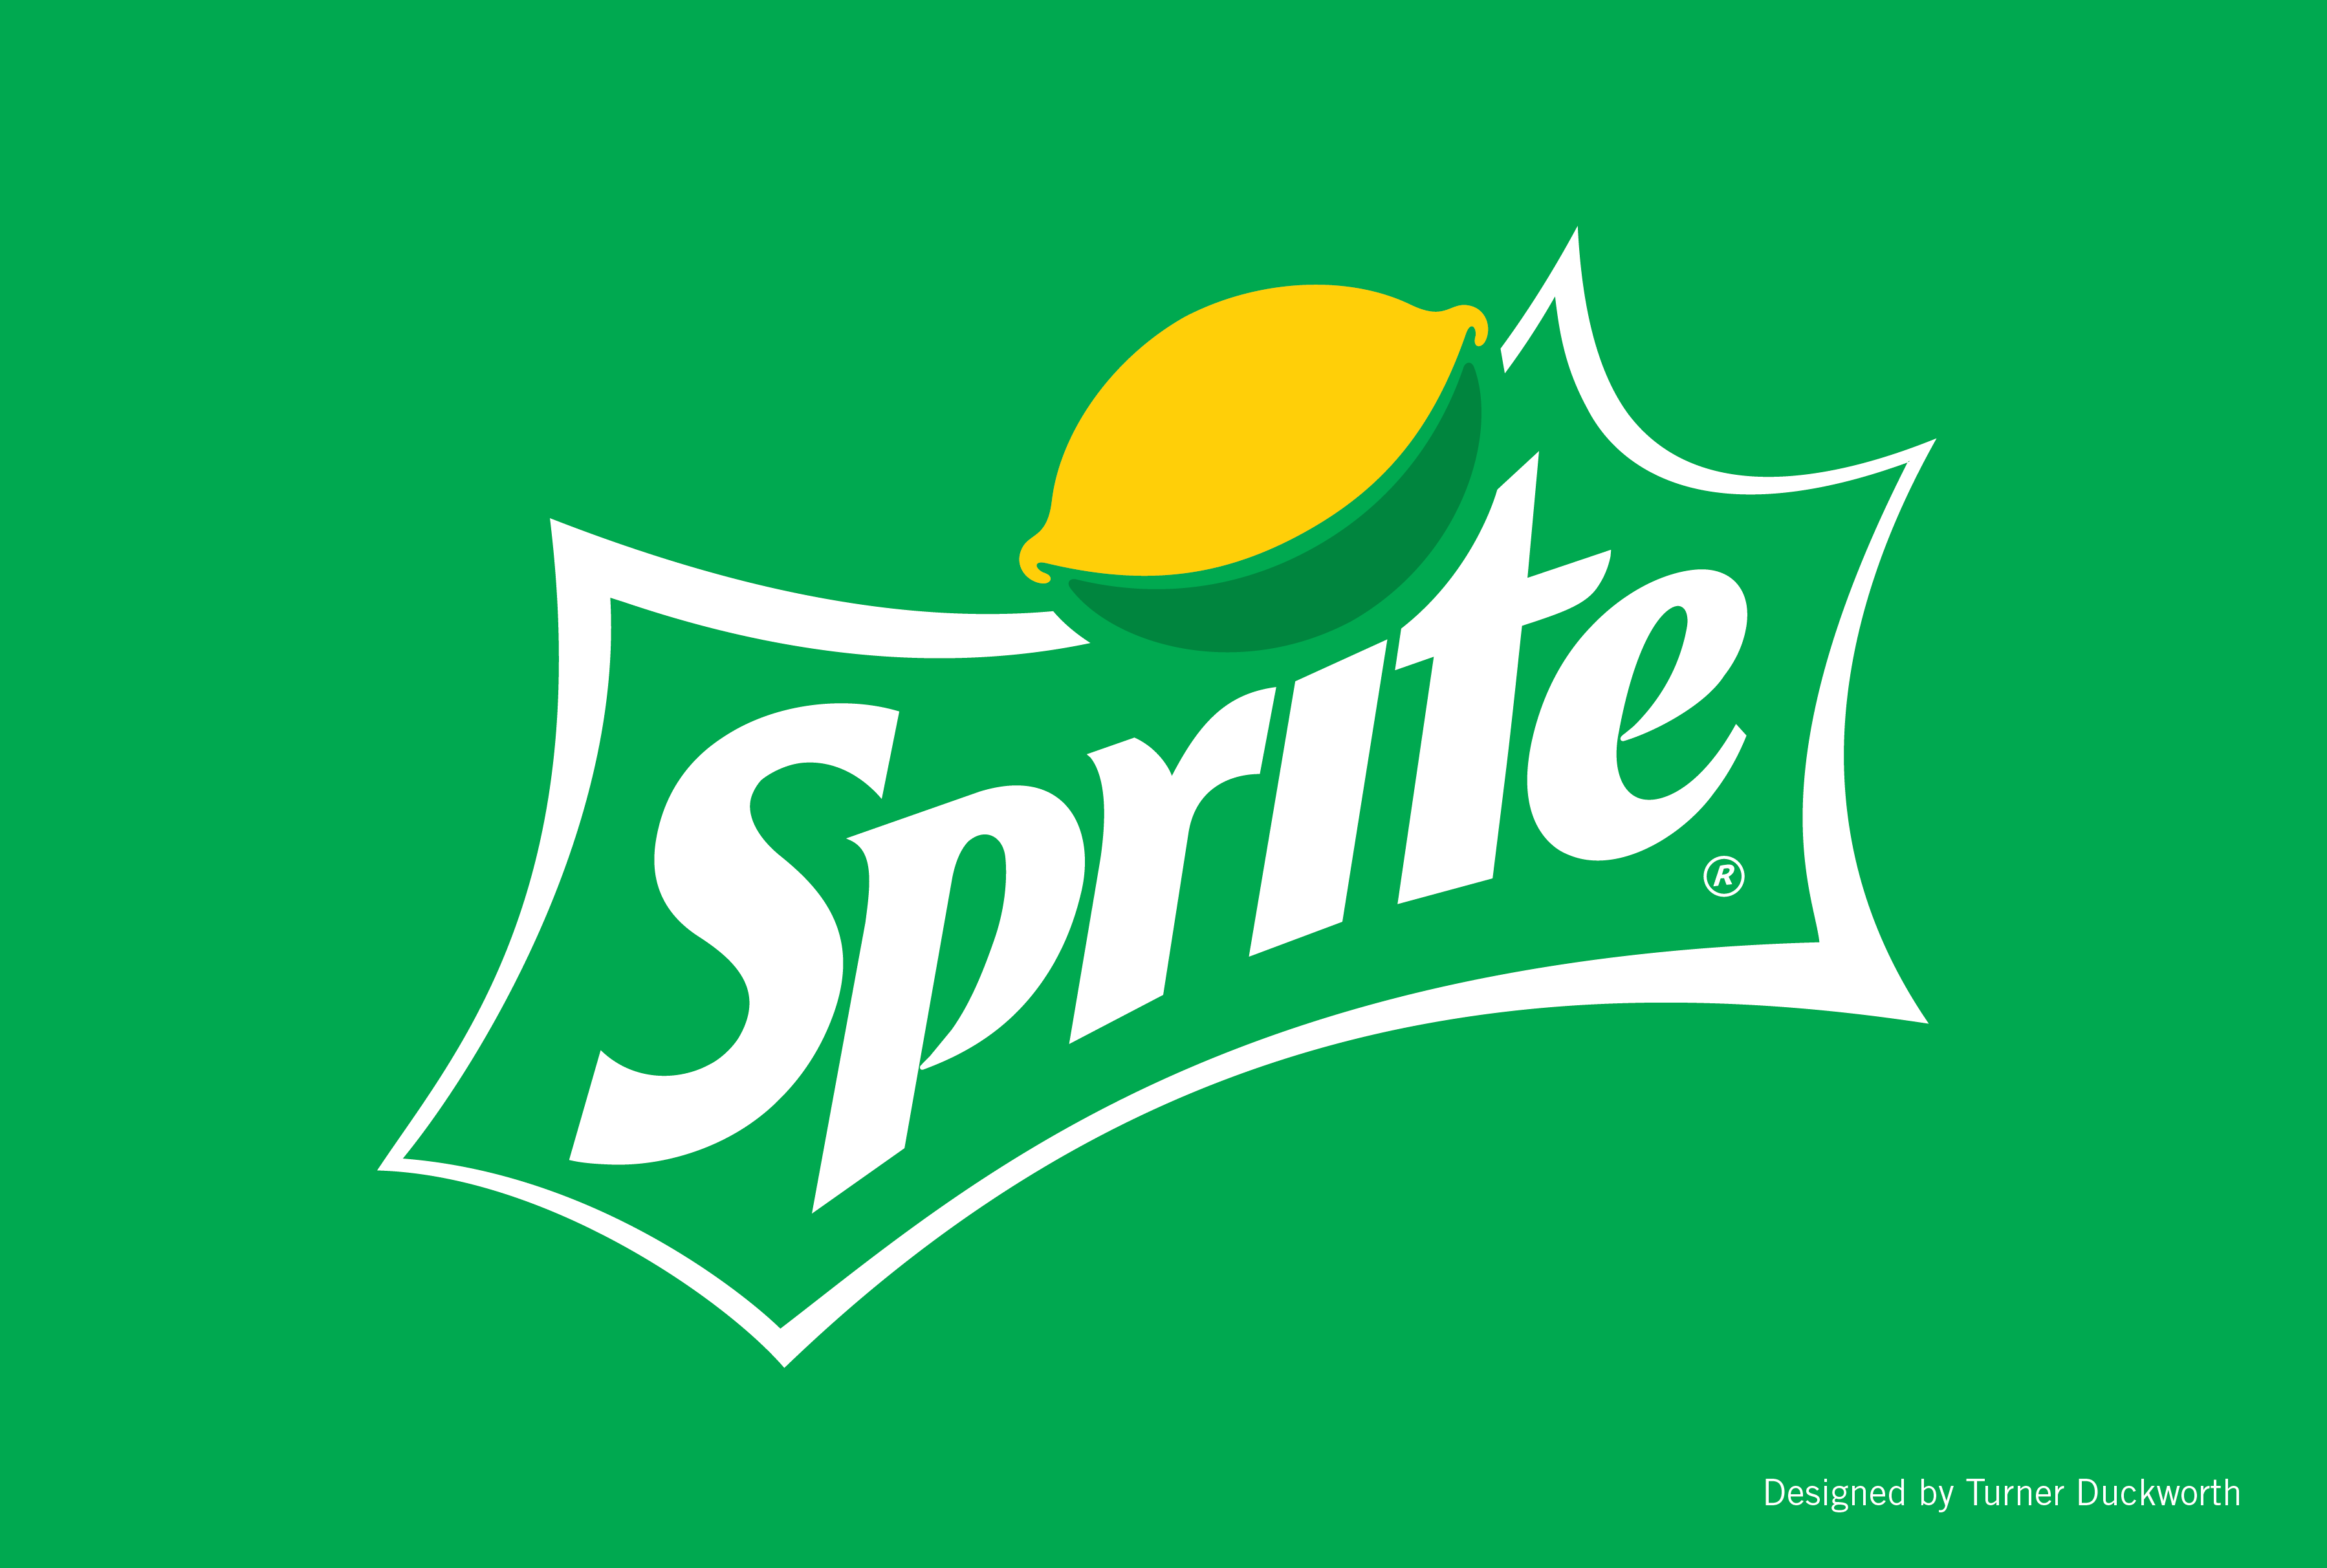 Cold Sprite Soft Drink Stock Photos and Images  123RF